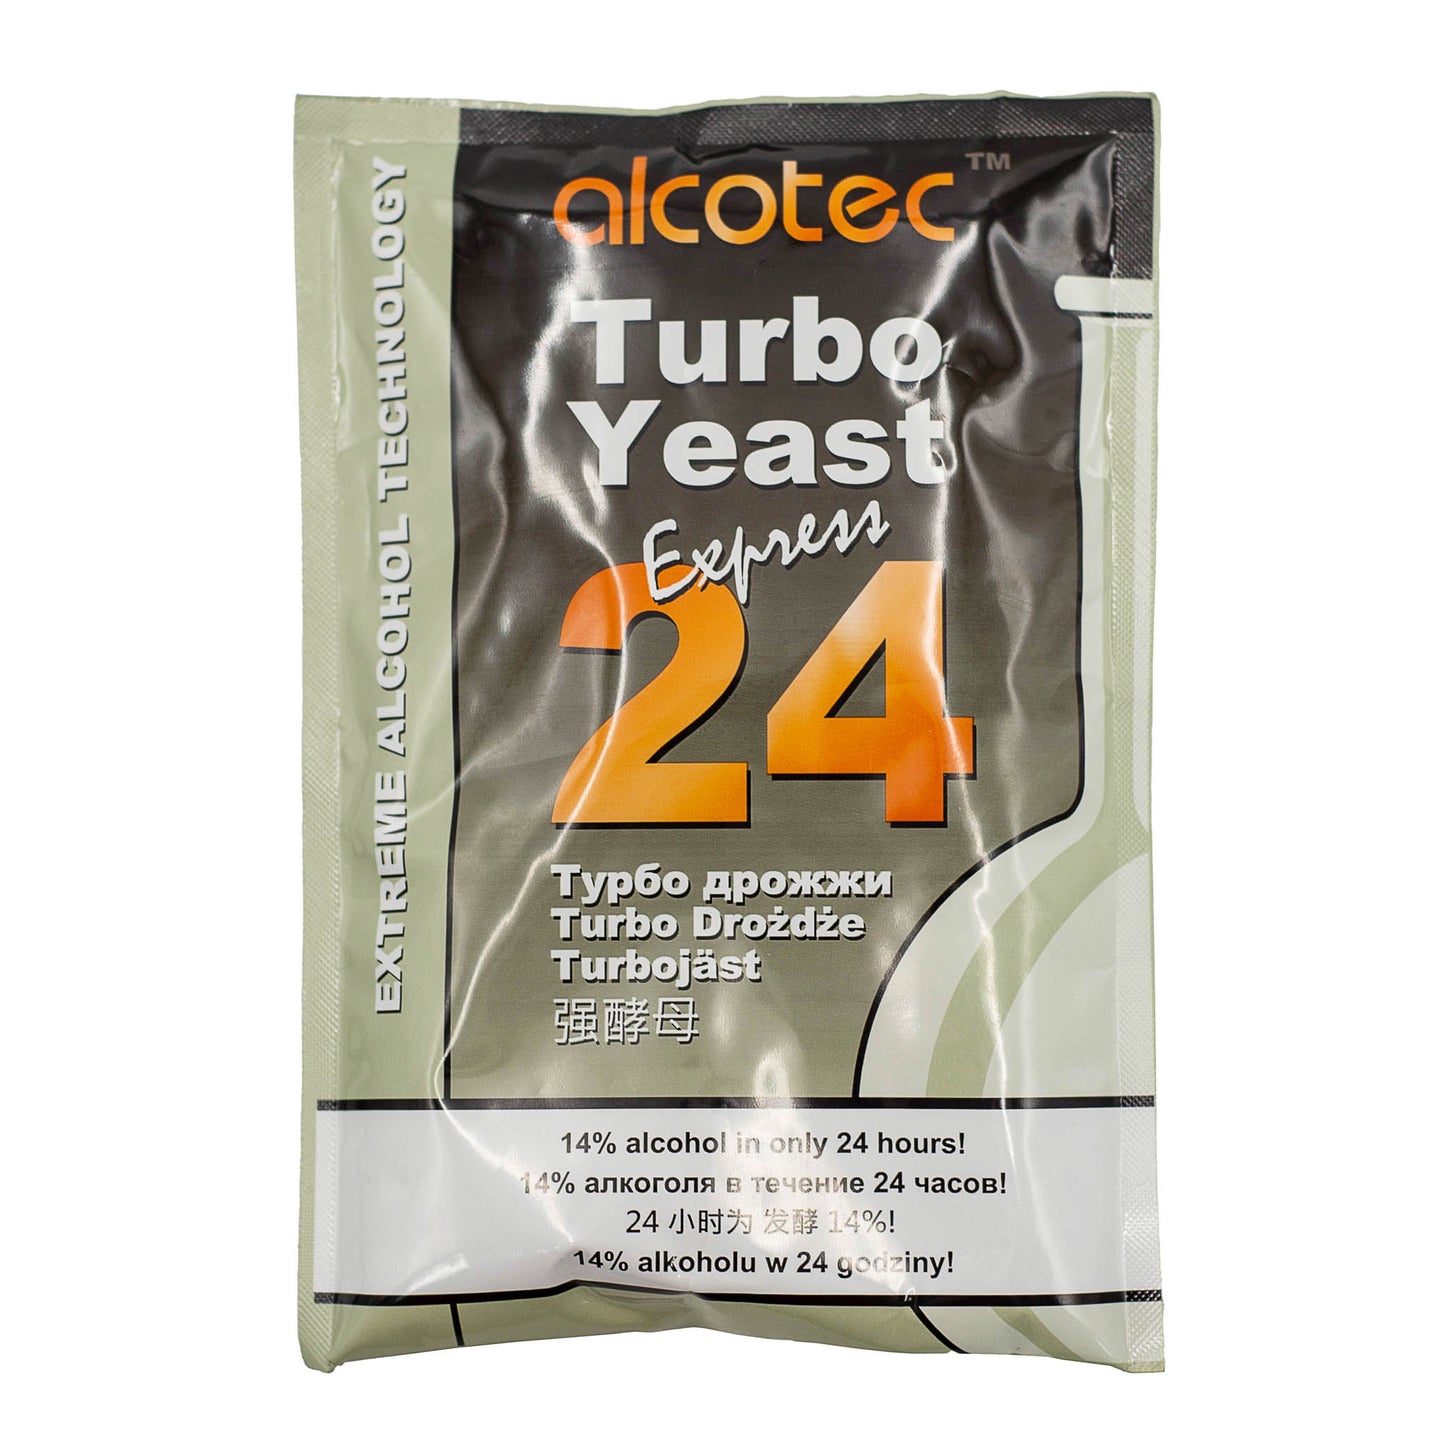 Alcotec 24 turbo yeast will go from zero to 14% alcohol by volume in around 24 hours